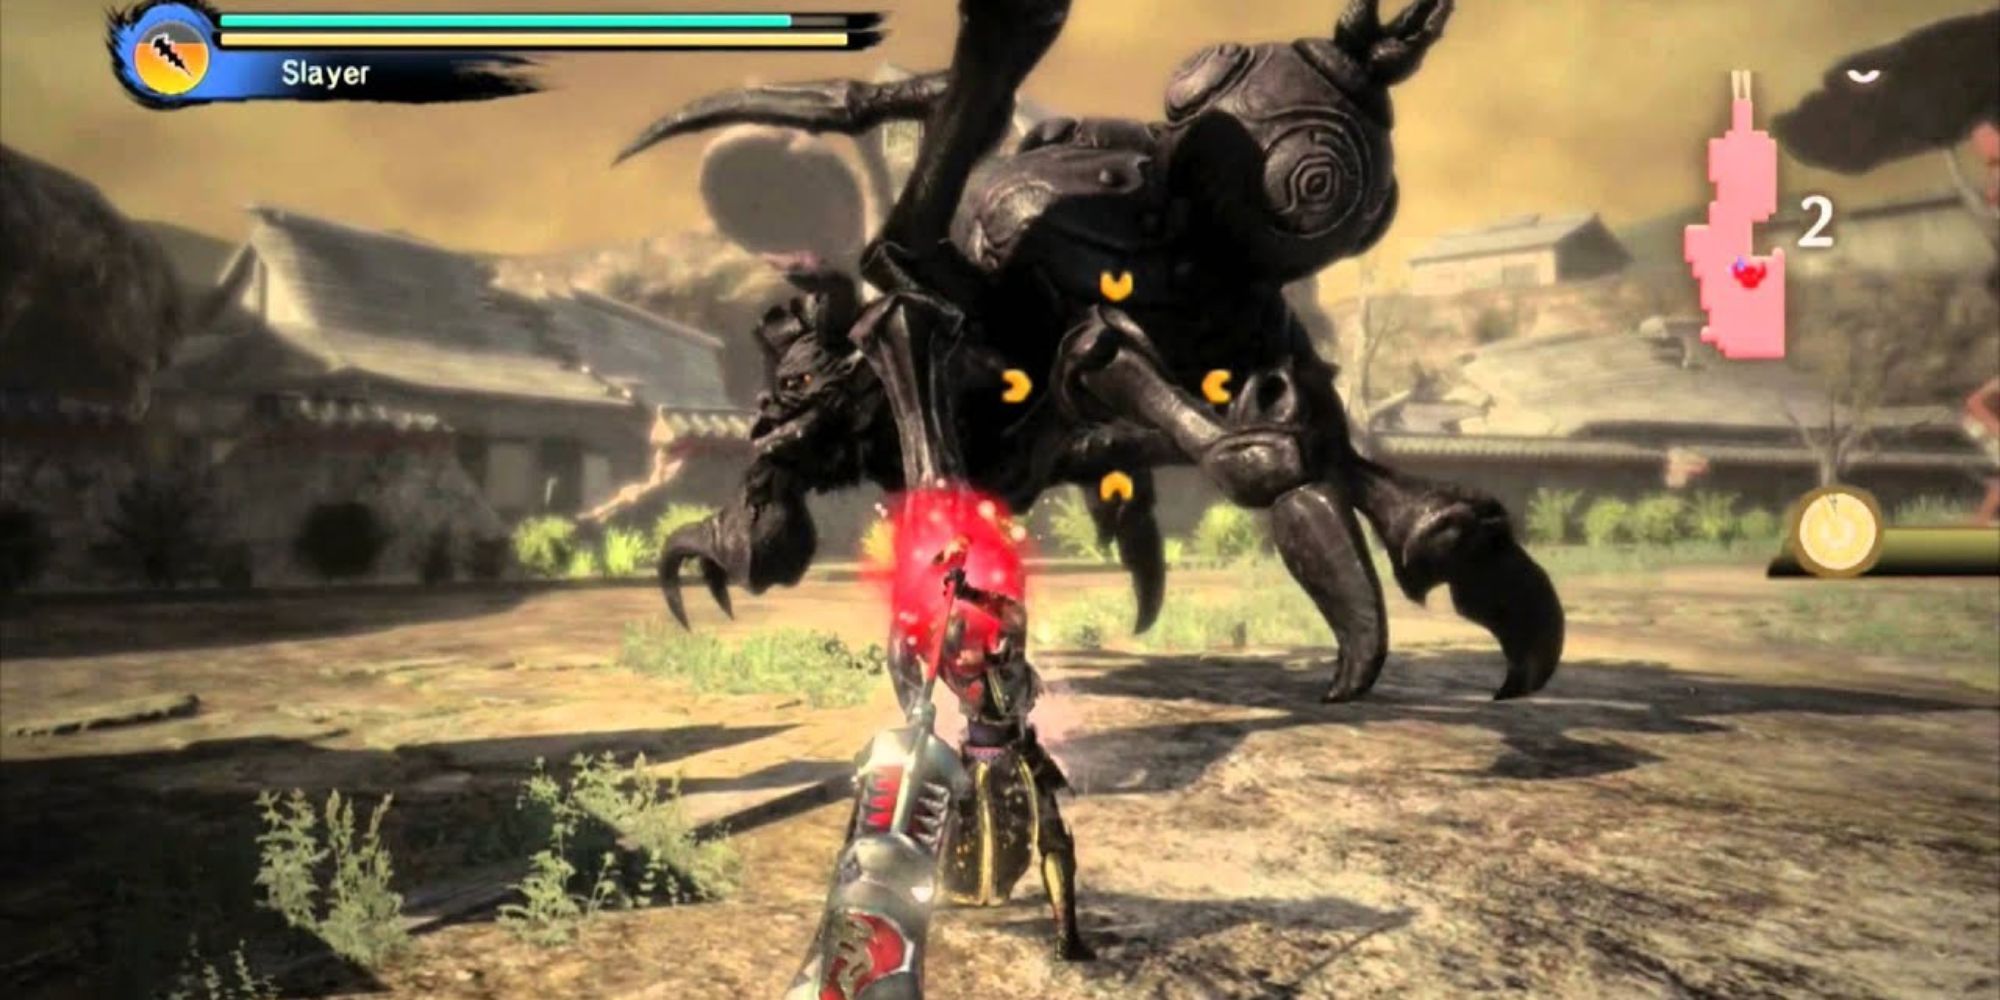 A player attacking a monster with a large sword in Toukiden: Kiwami